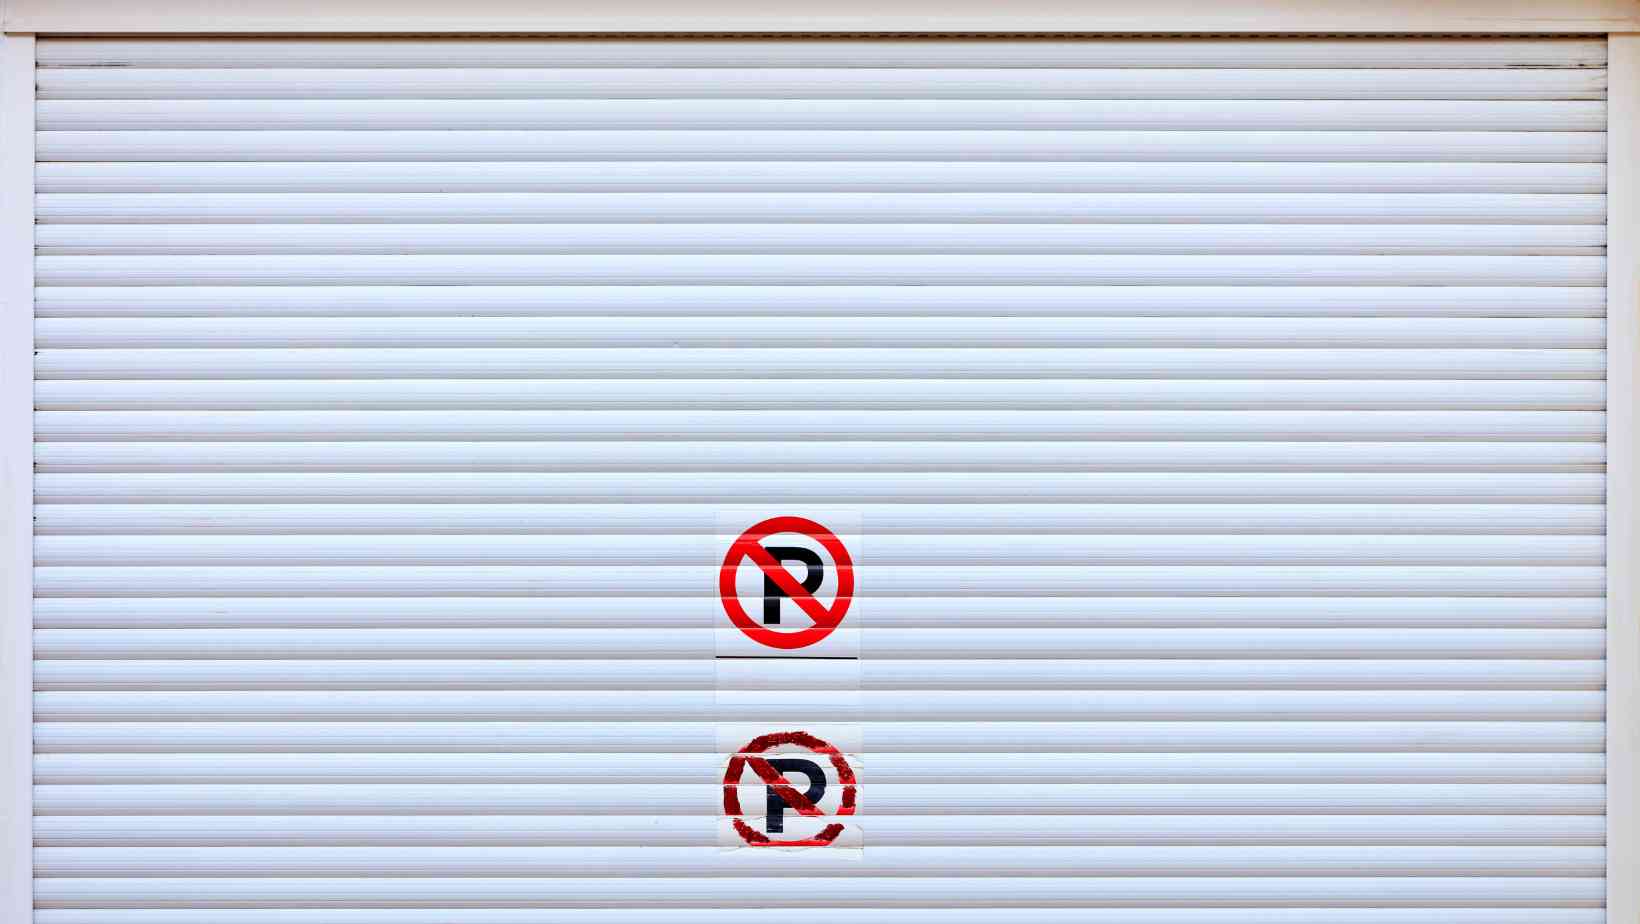 Installing a Shutter for Car Parking: Benefits and Options